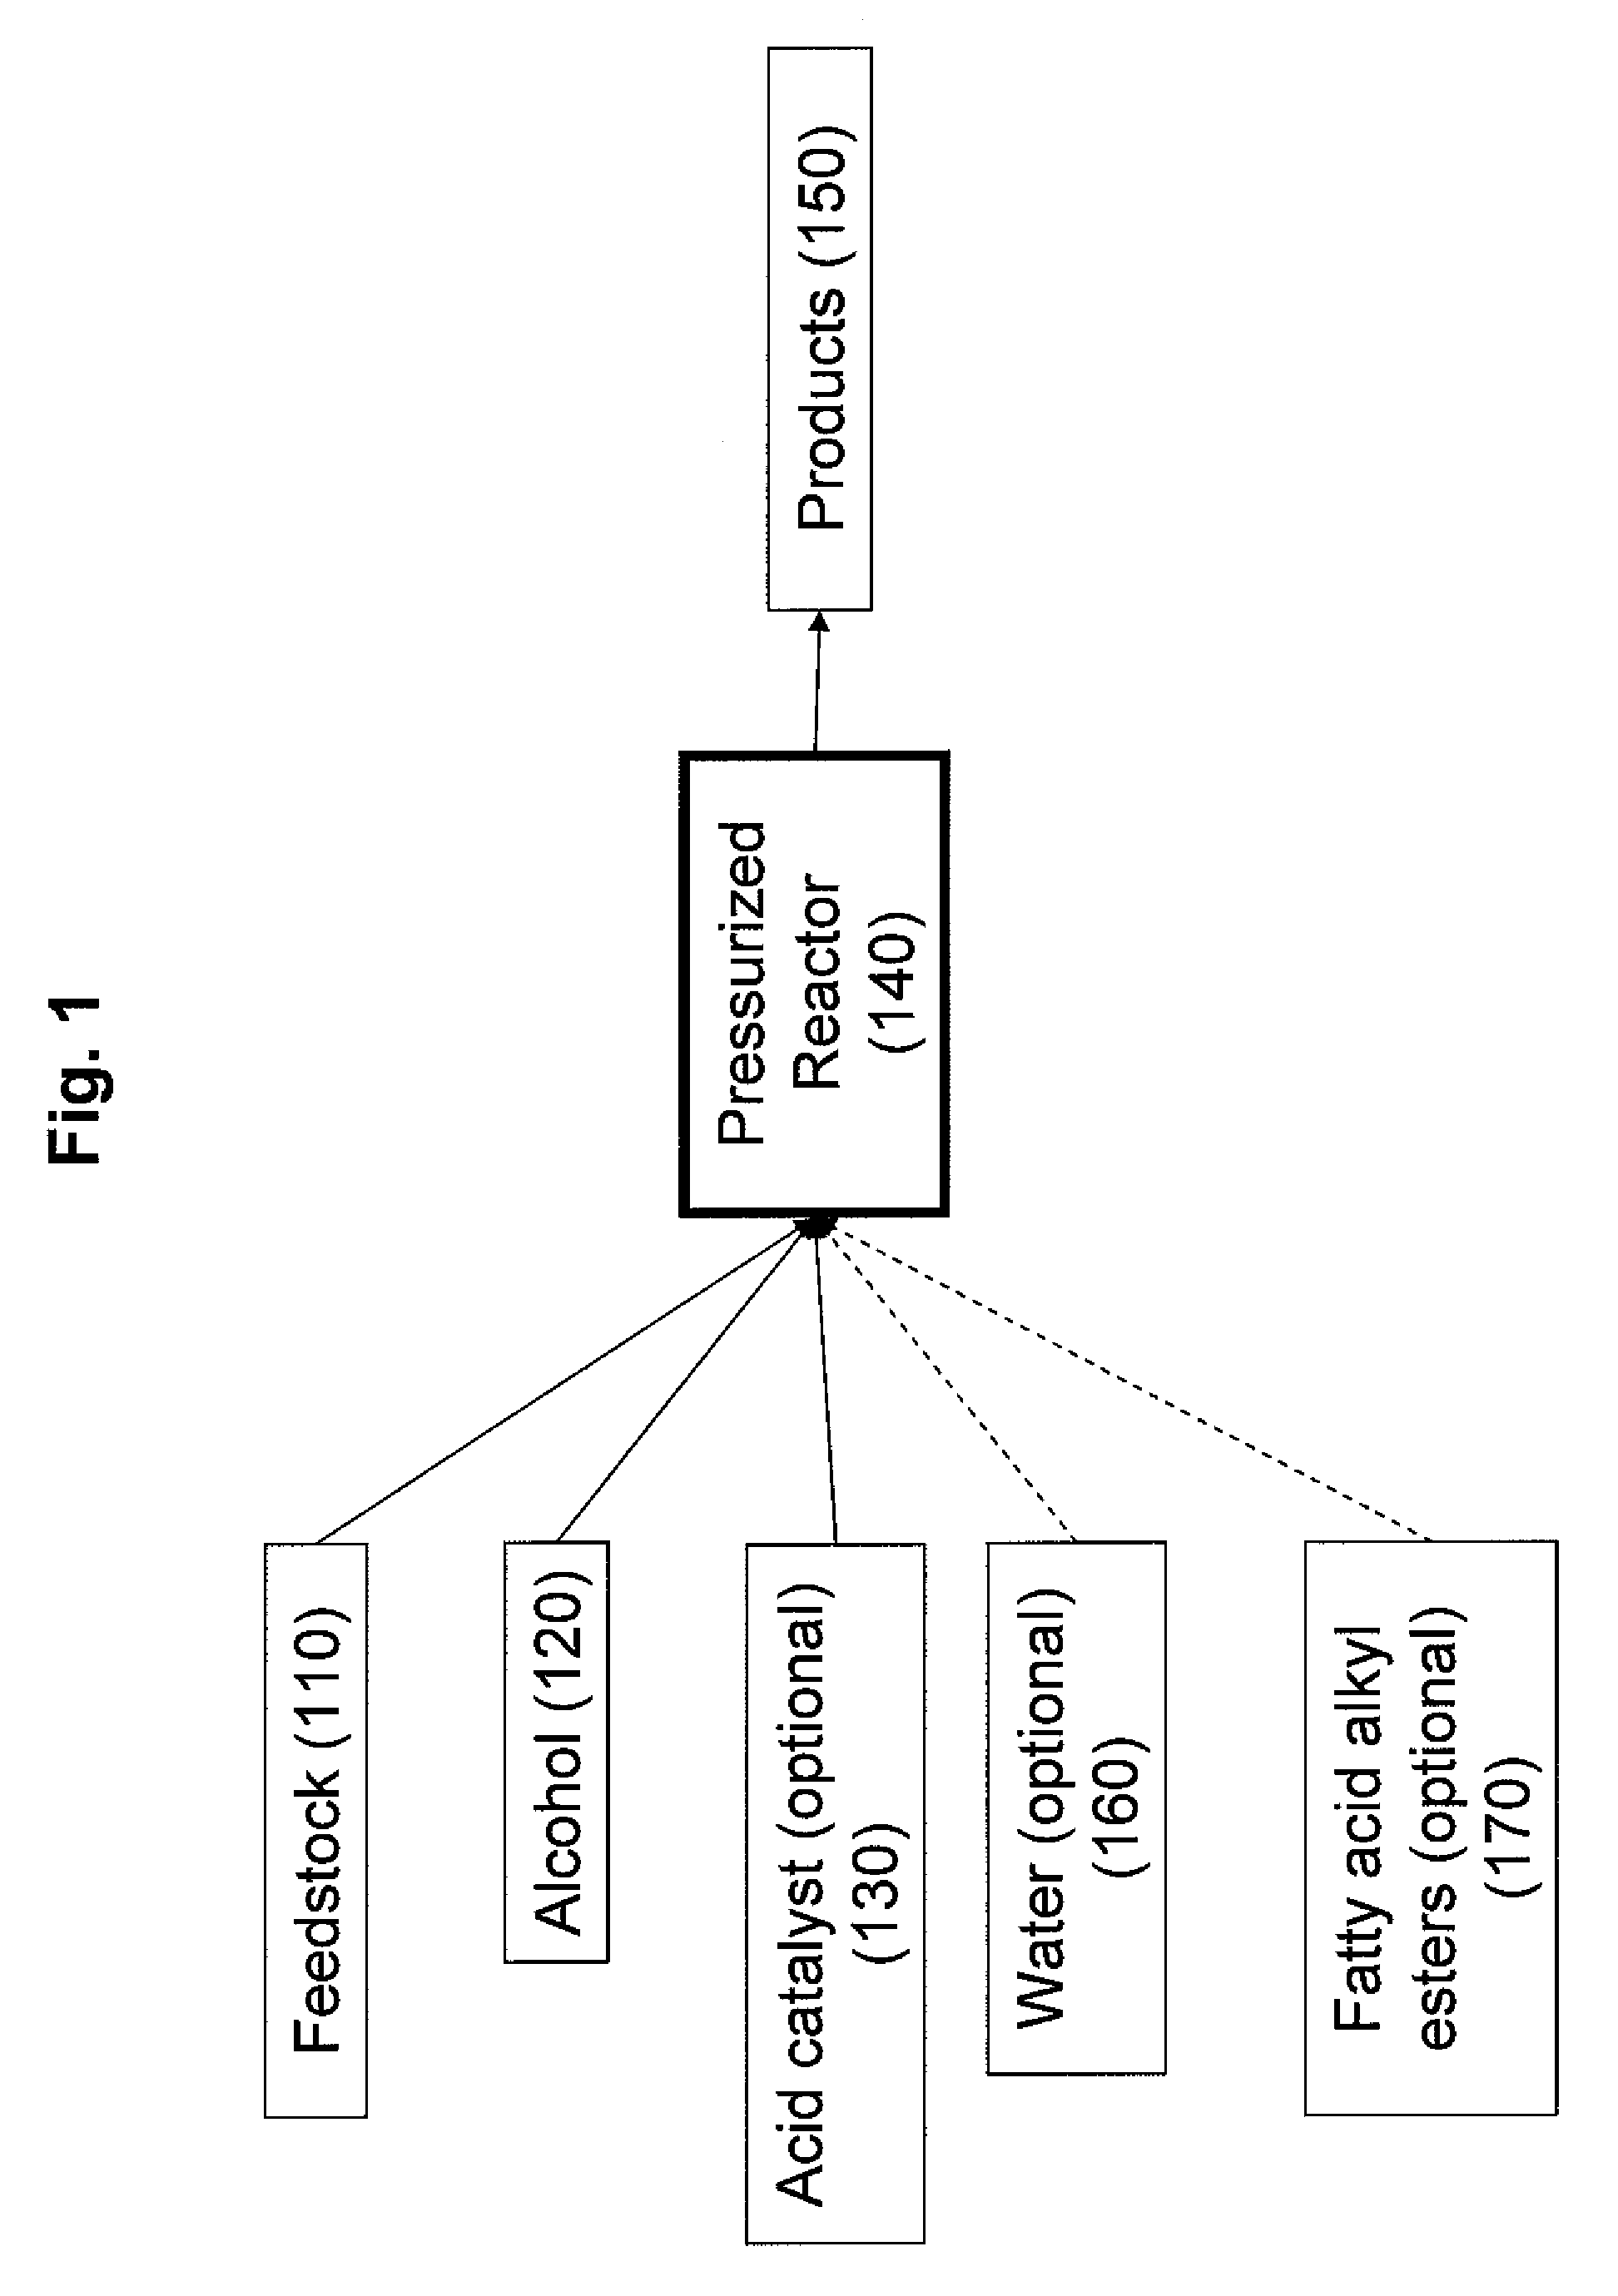 Production of biodiesel, cellulosic sugars, and peptides from the simultaneous esterification and alcoholysis/hydrolysis of materials with oil-containing substituents including phospholipids and peptidic content